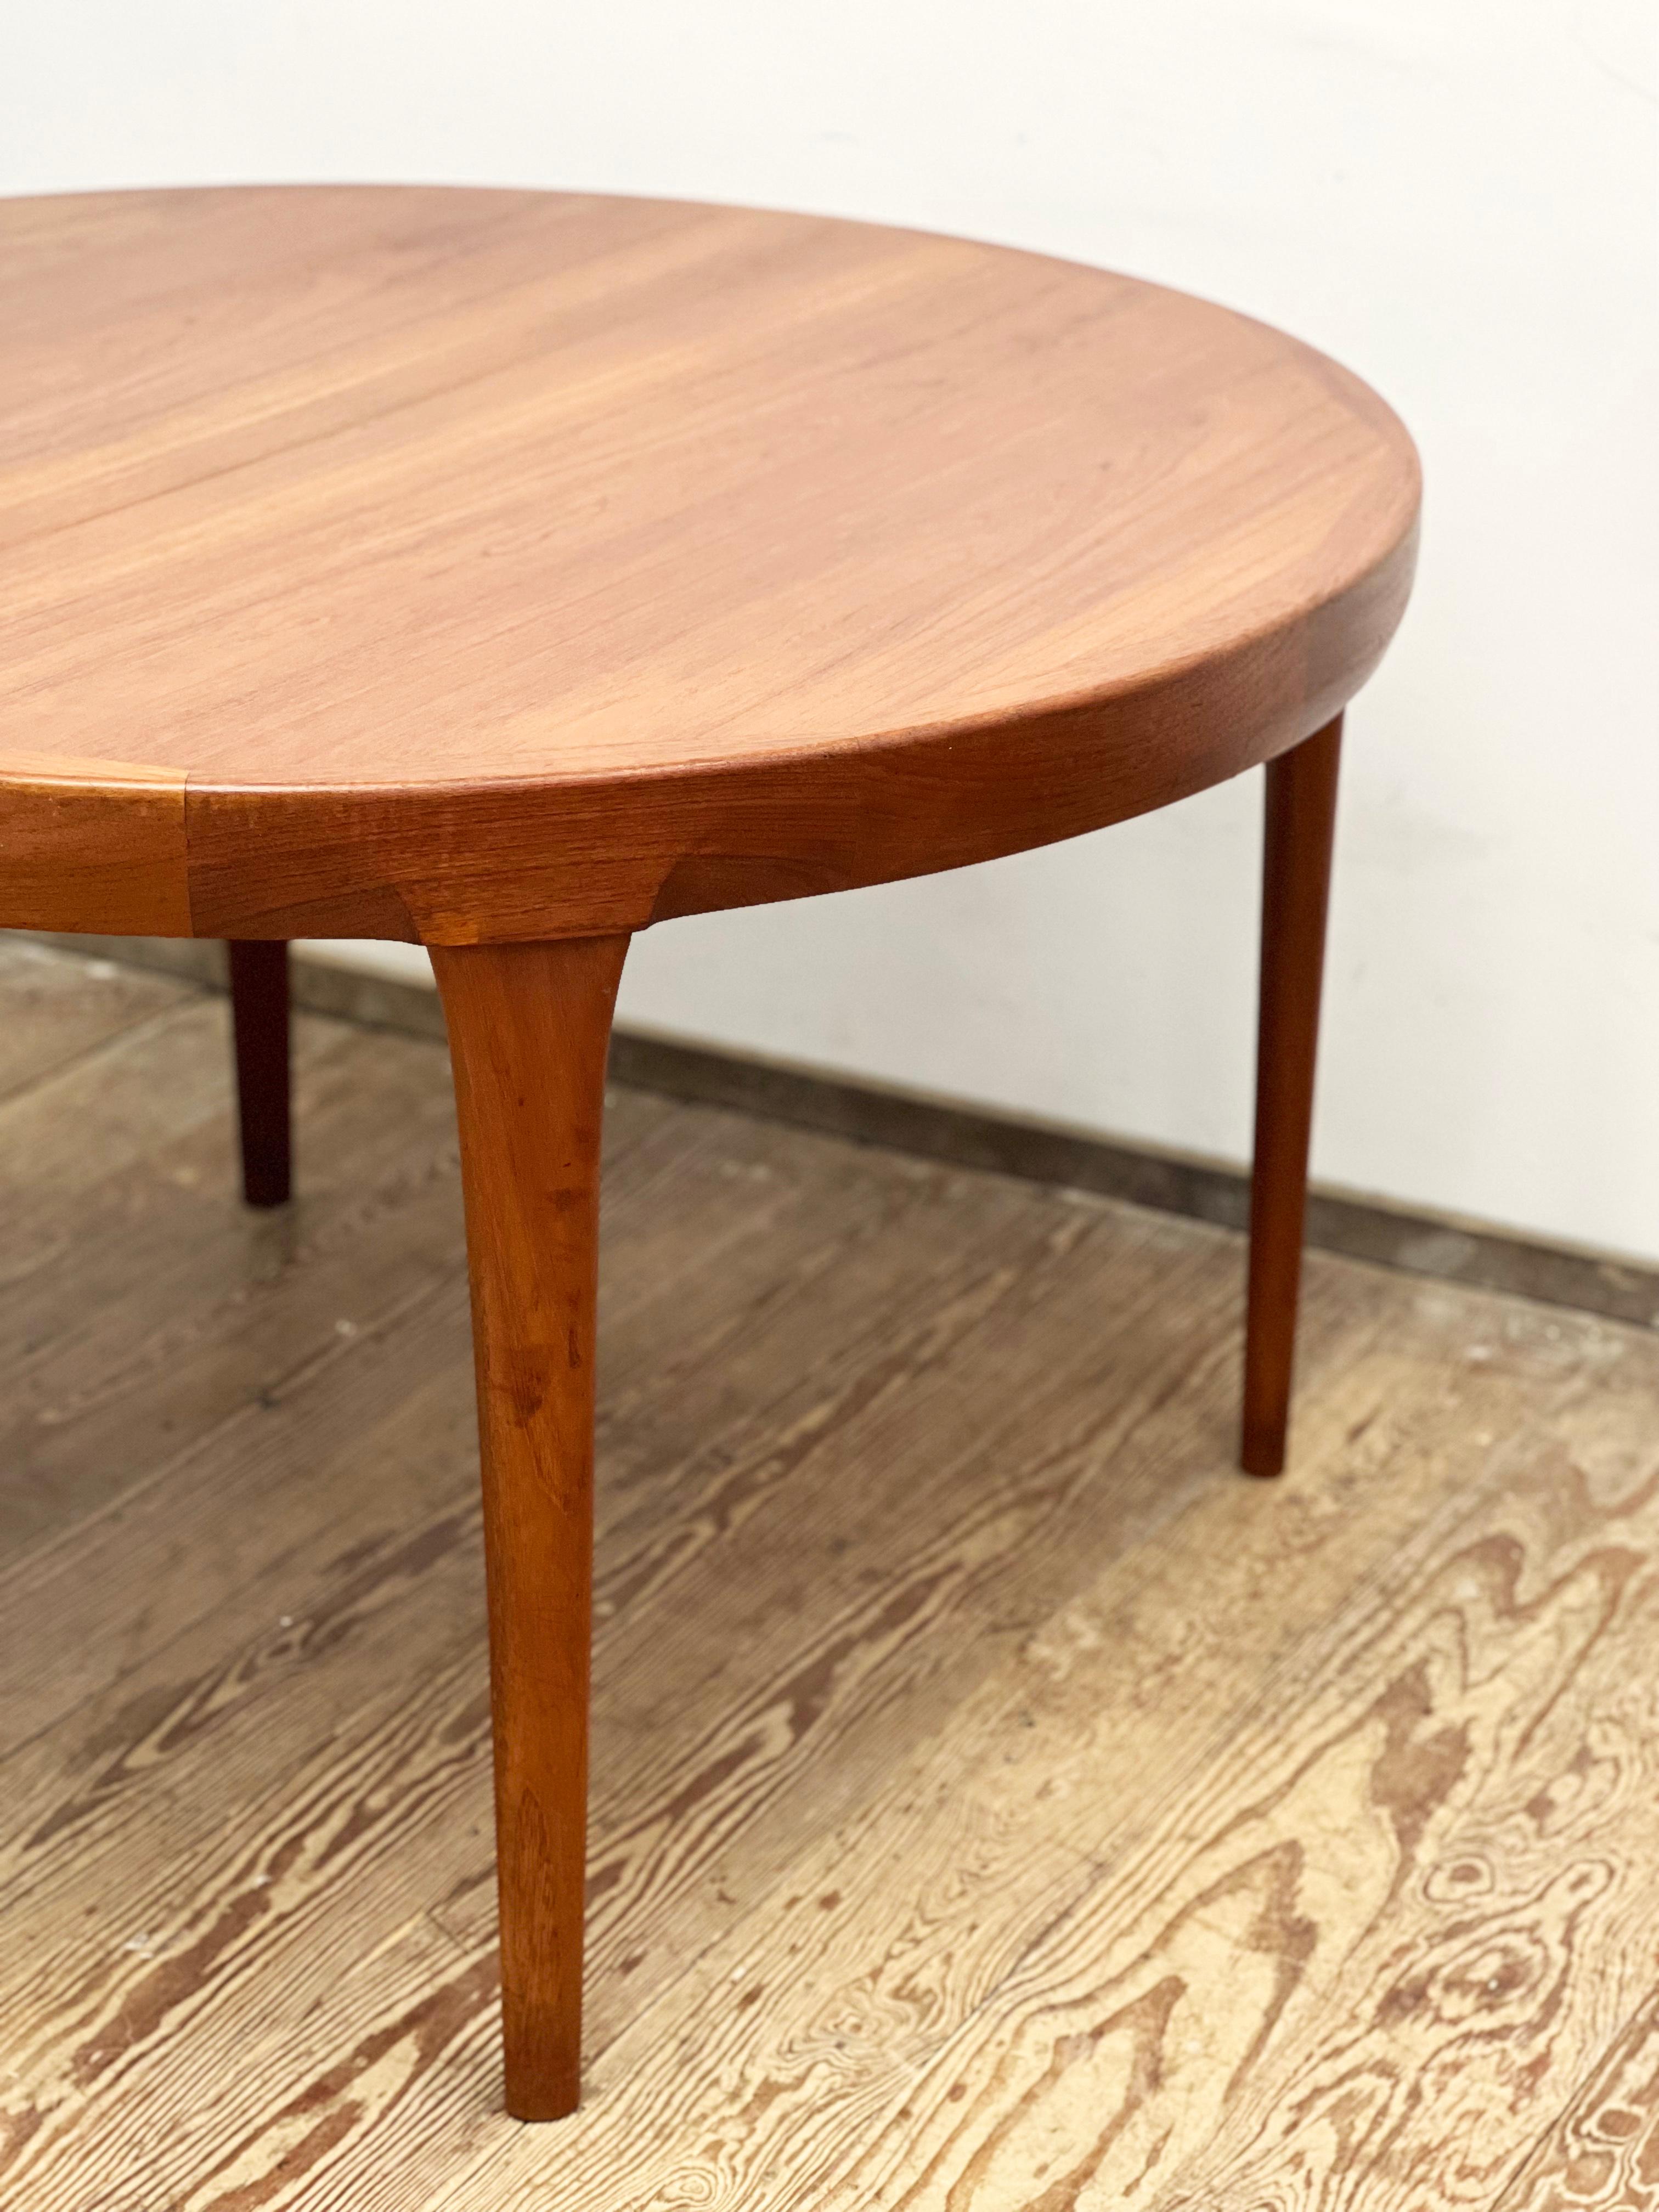 Mid-20th Century Extendable Round Mid-Century Teak Dining Table by Ib Kofod-Larsen for Faarup